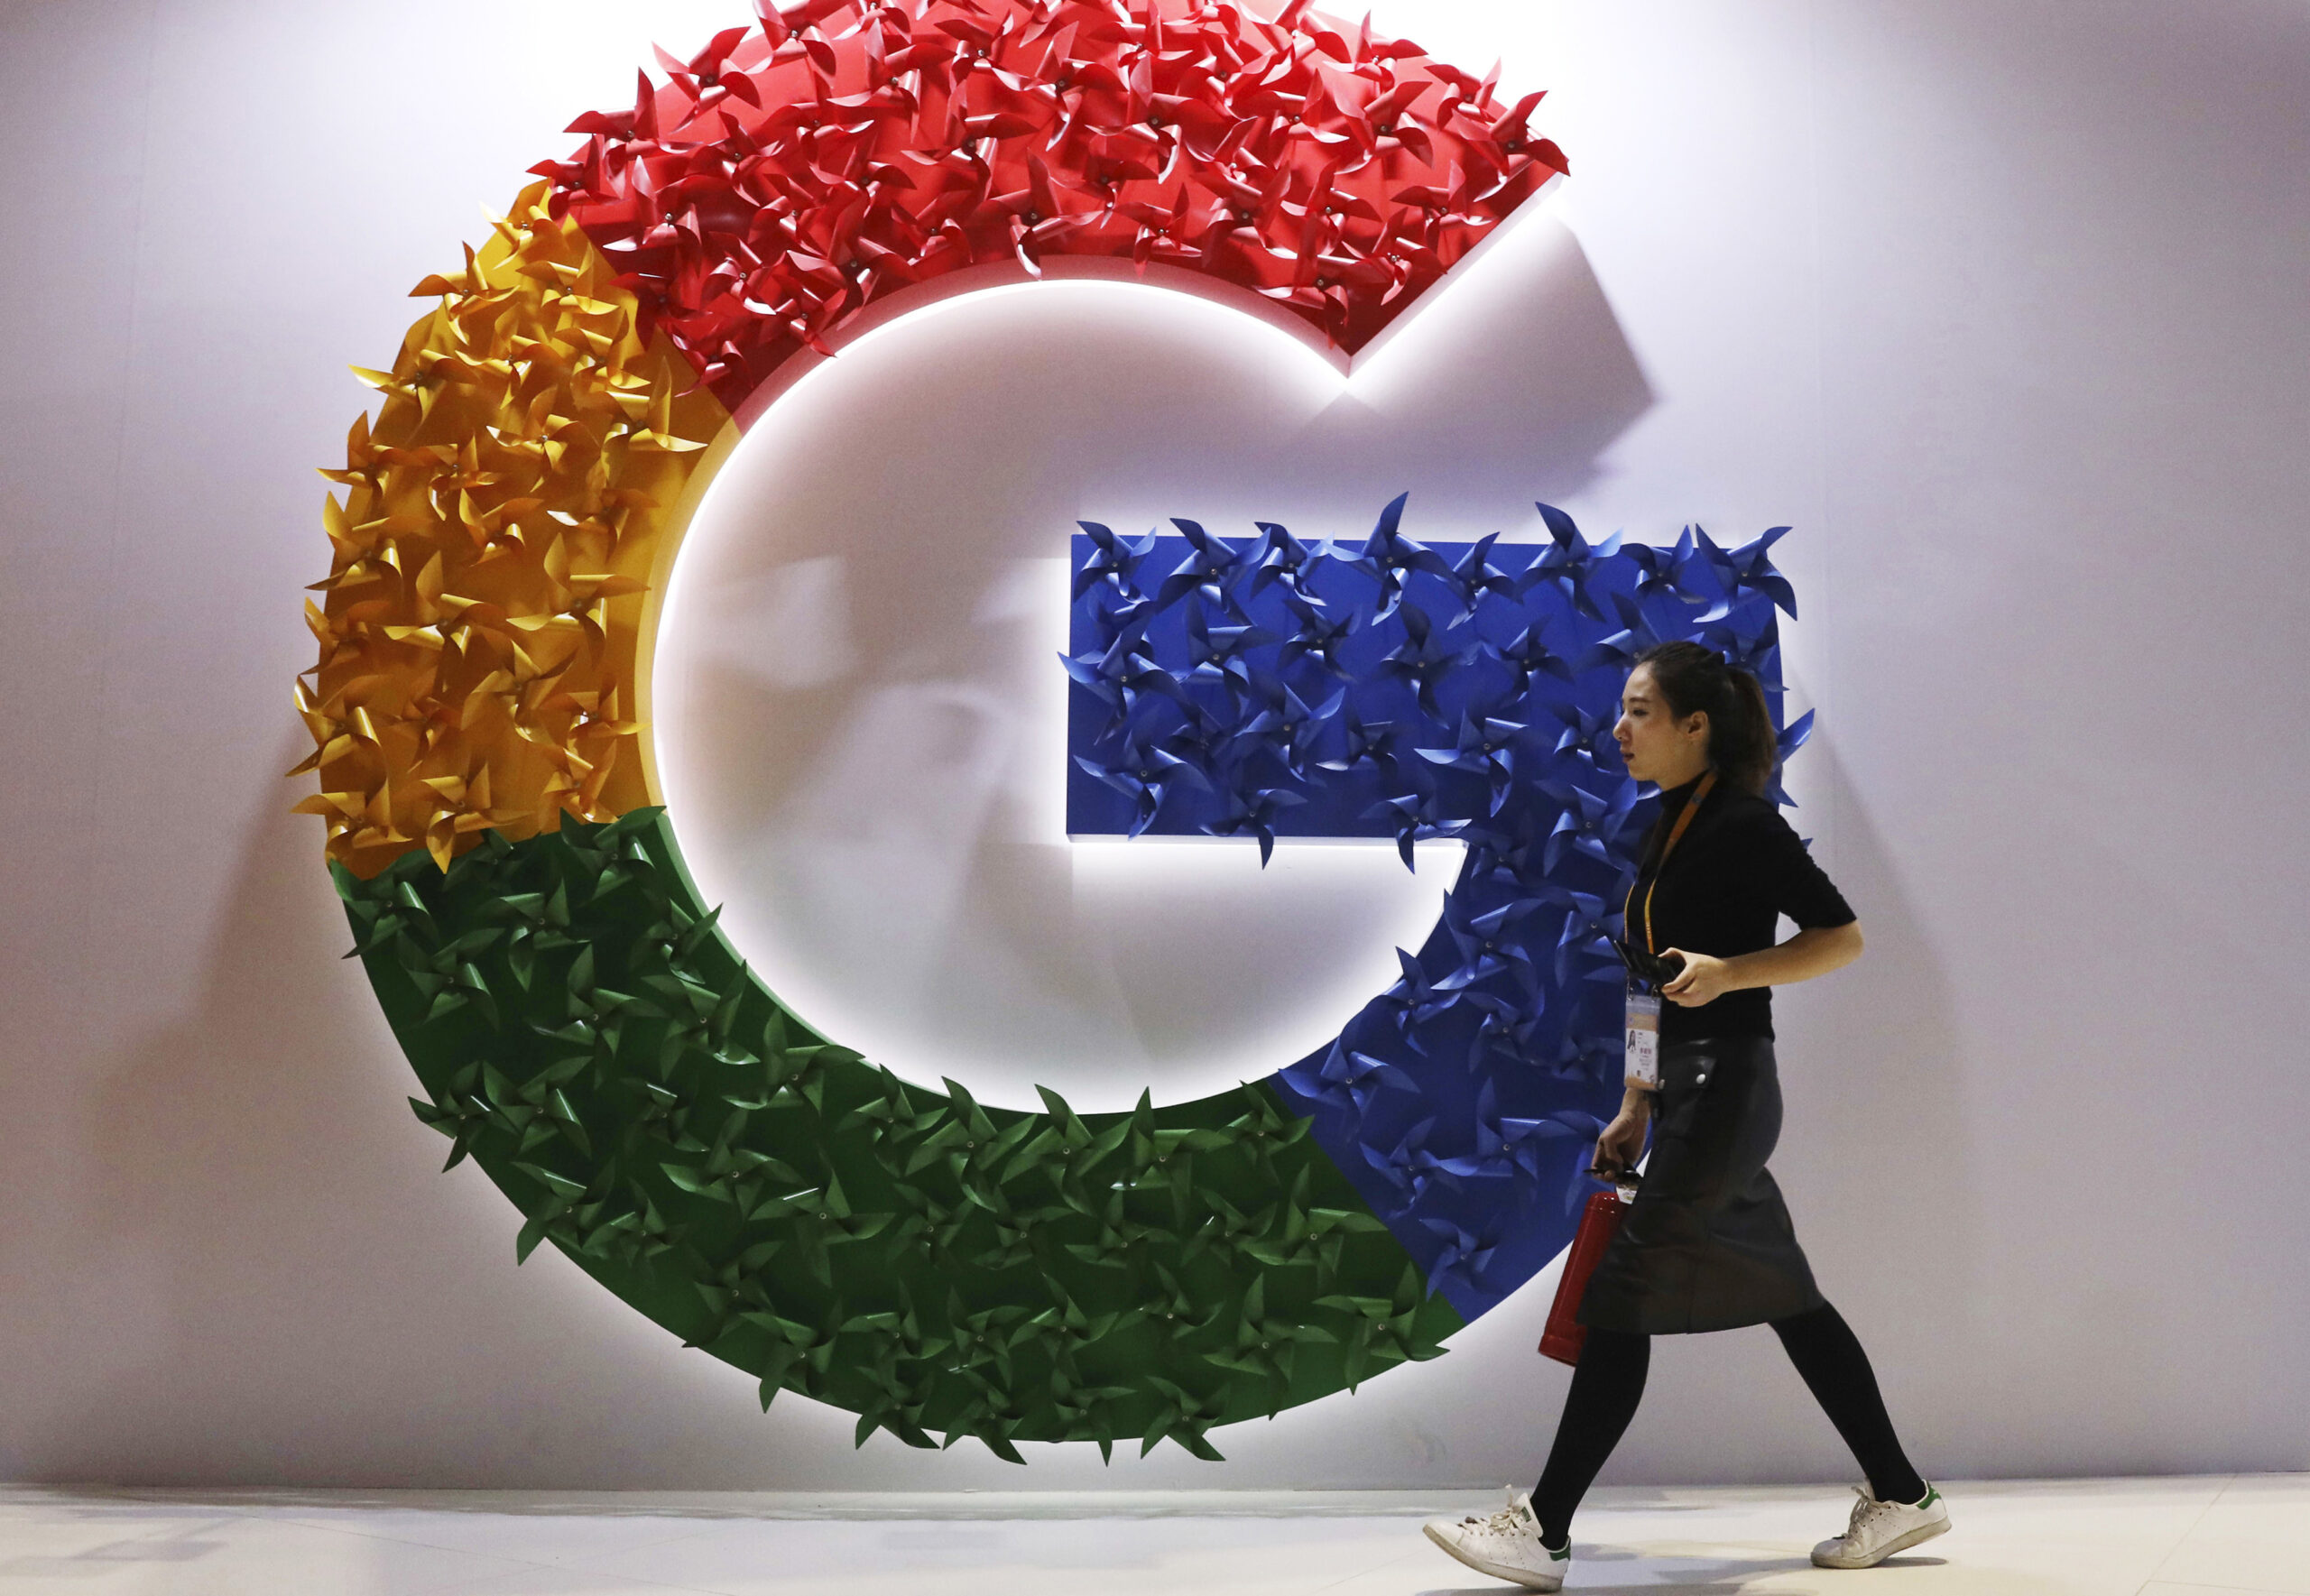 FILE - In this Monday, Nov. 5, 2018 file photo, a woman walks past the logo for Google at the China International Import Expo in Shanghai. France's anti-competition watchdog has decided to fine Google 220 million euros ($268 million) for abusing its “dominant position” in the complex business of online advertising. It said Monday, June 7, 2021 that the move is unprecedented. (AP Photo/Ng Han Guan, File)